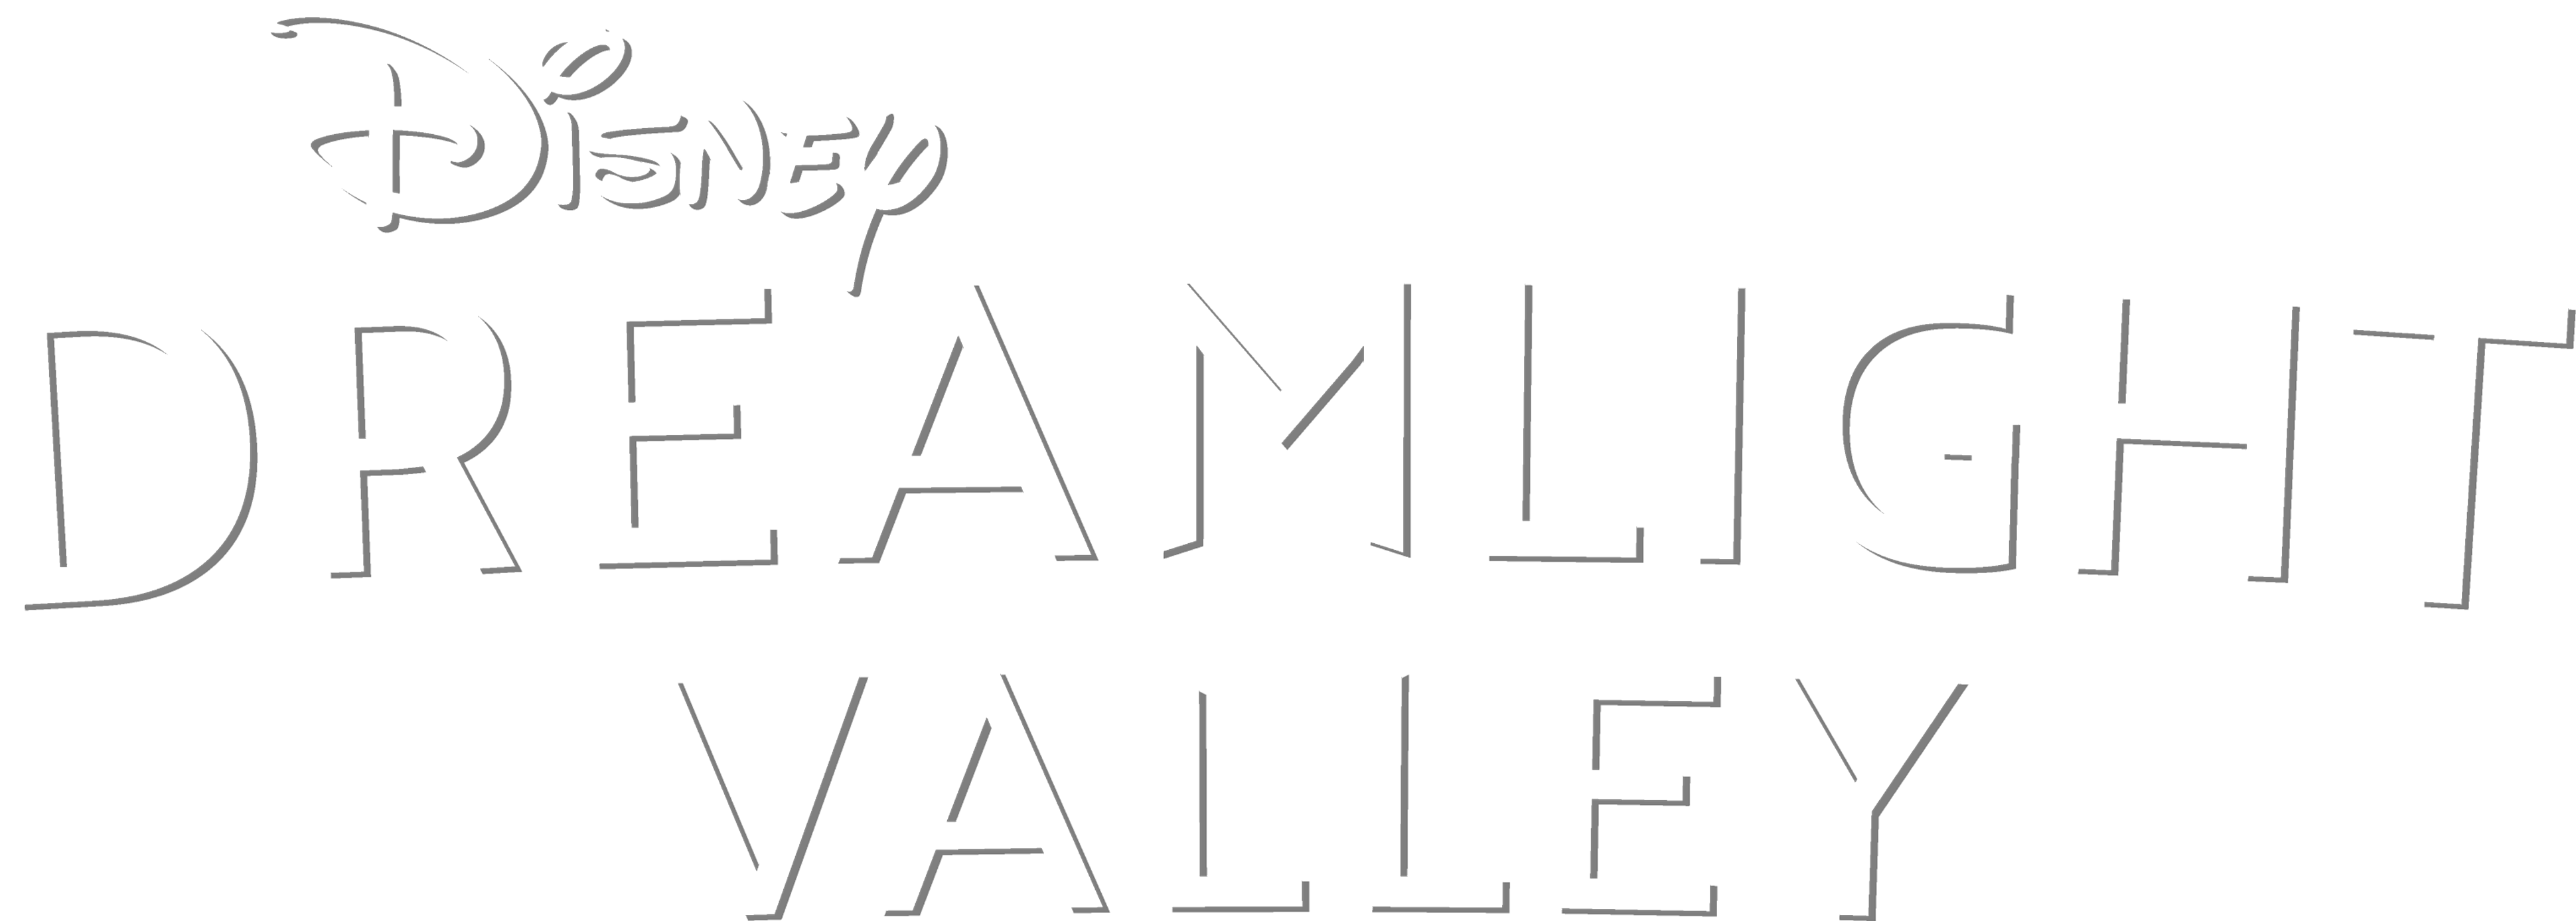 File:Disney Dreamlight Valley logo.png - Wikimedia Commons